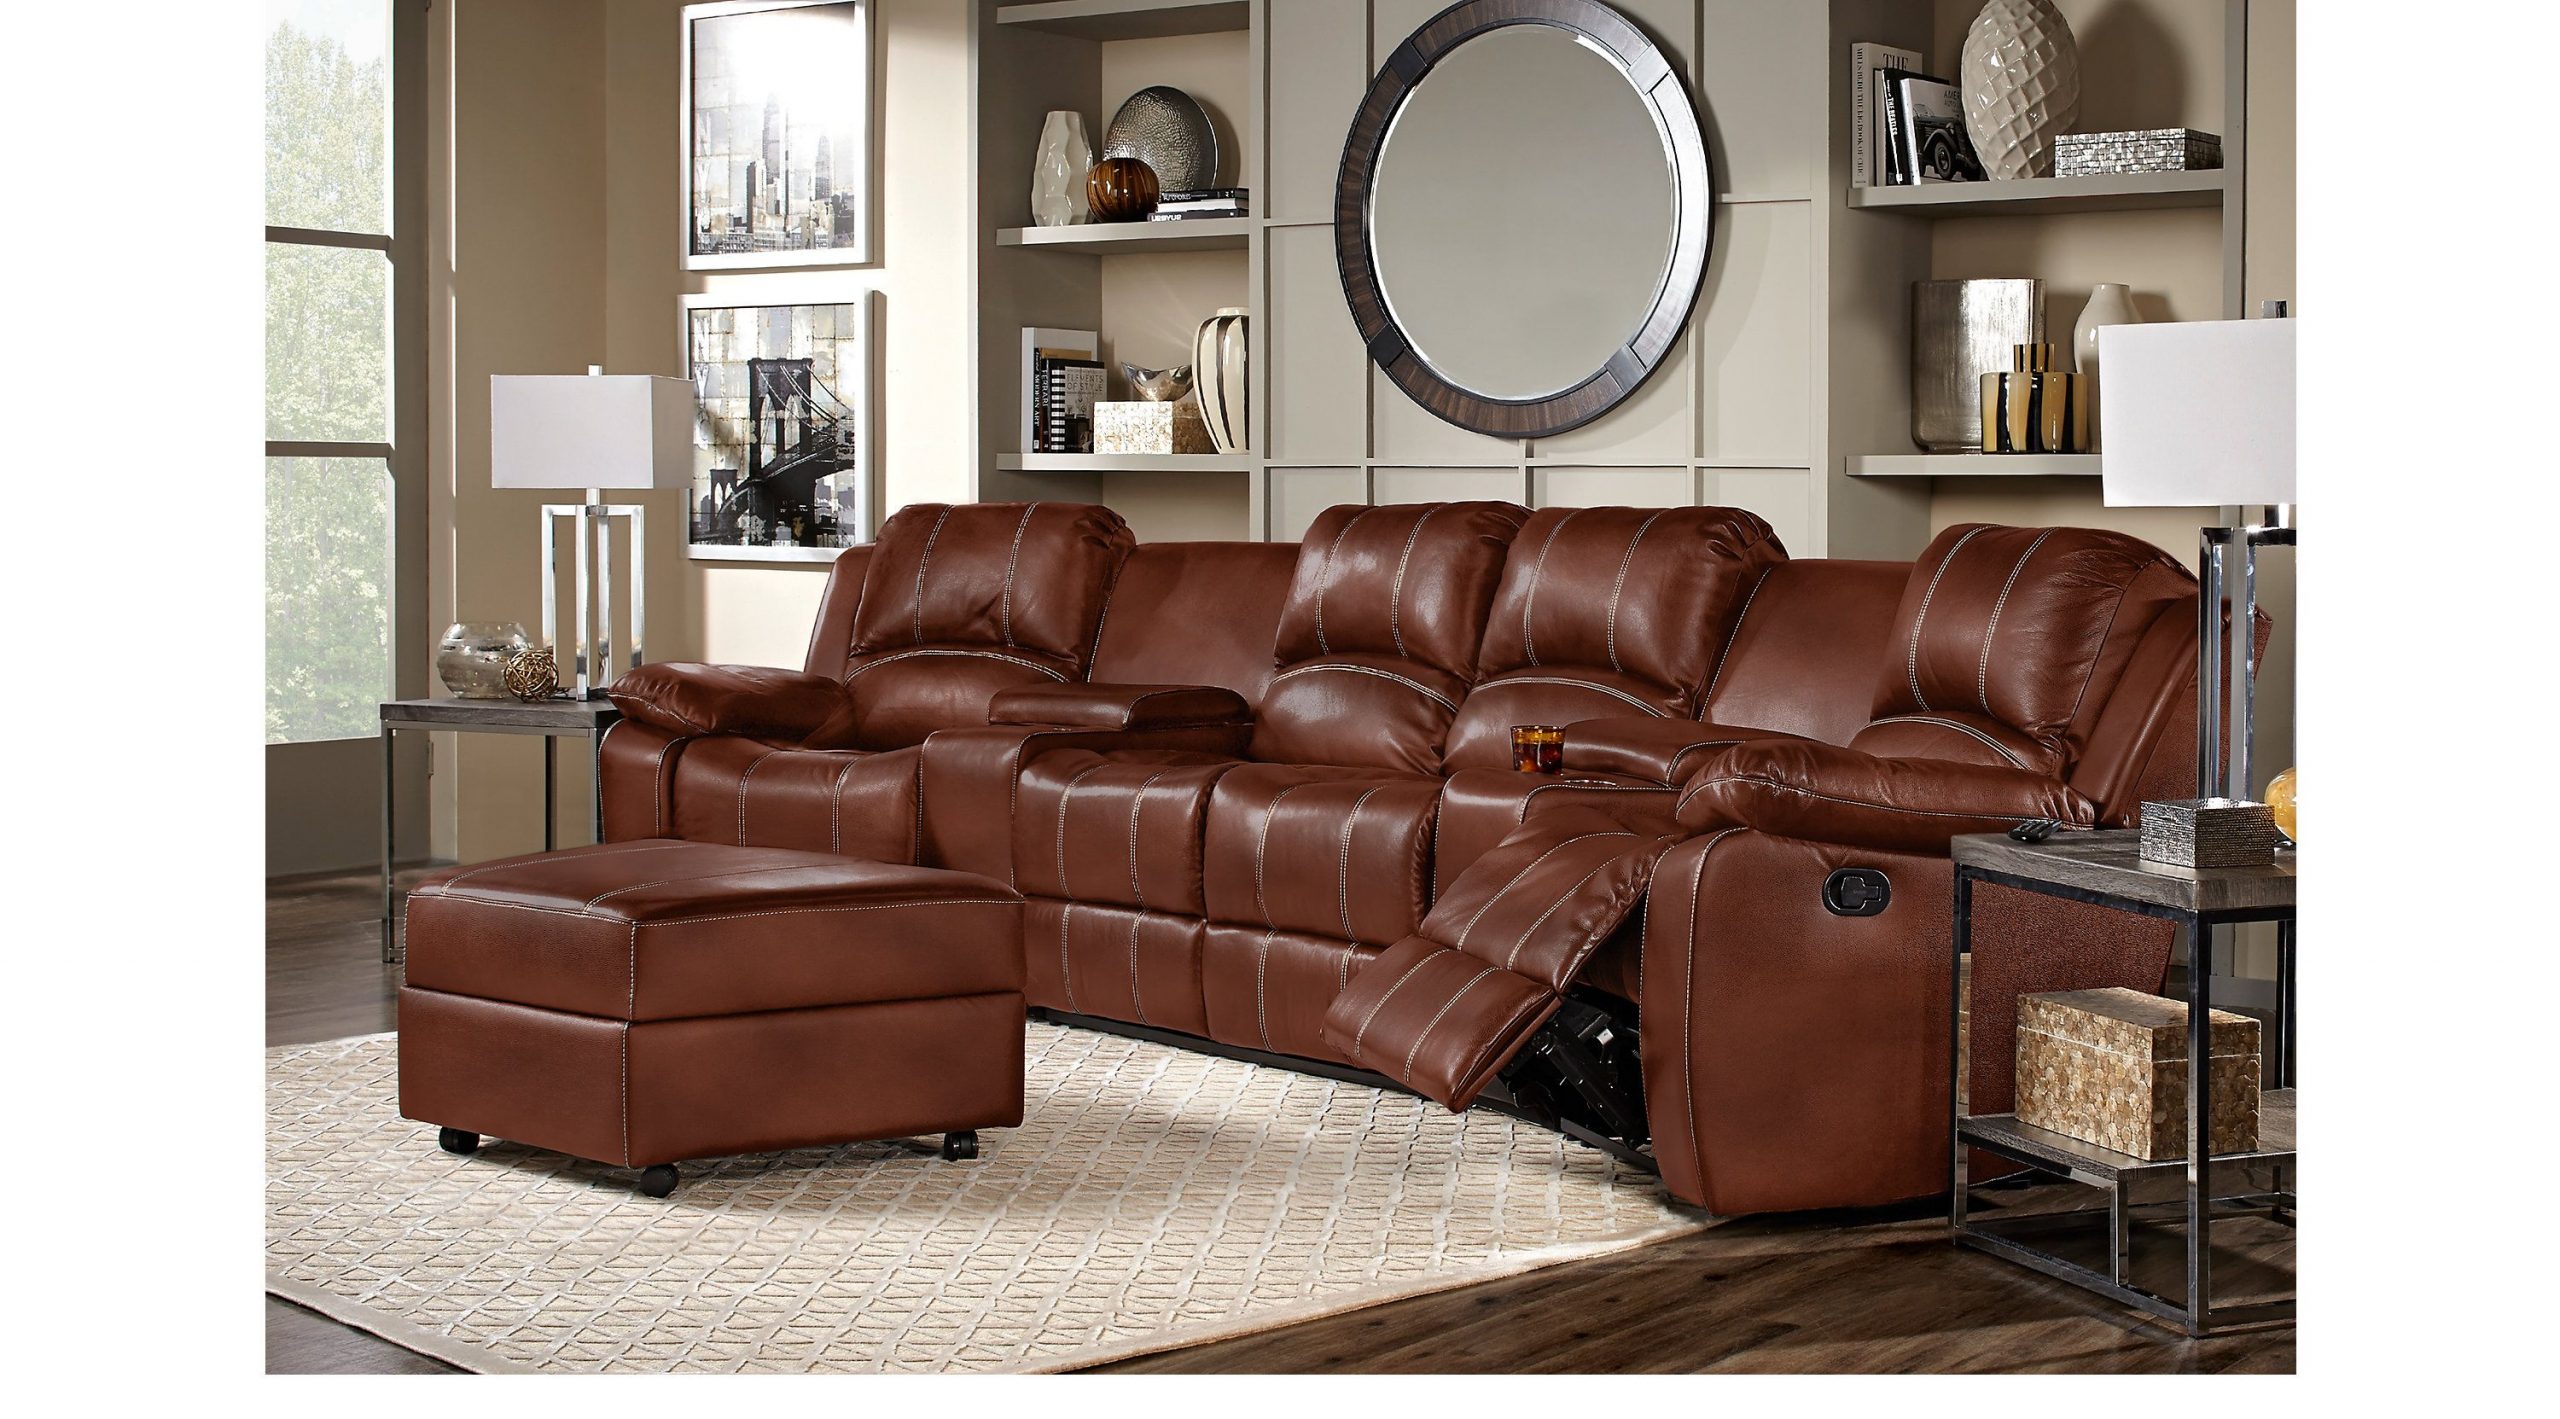 creame leather living room sets